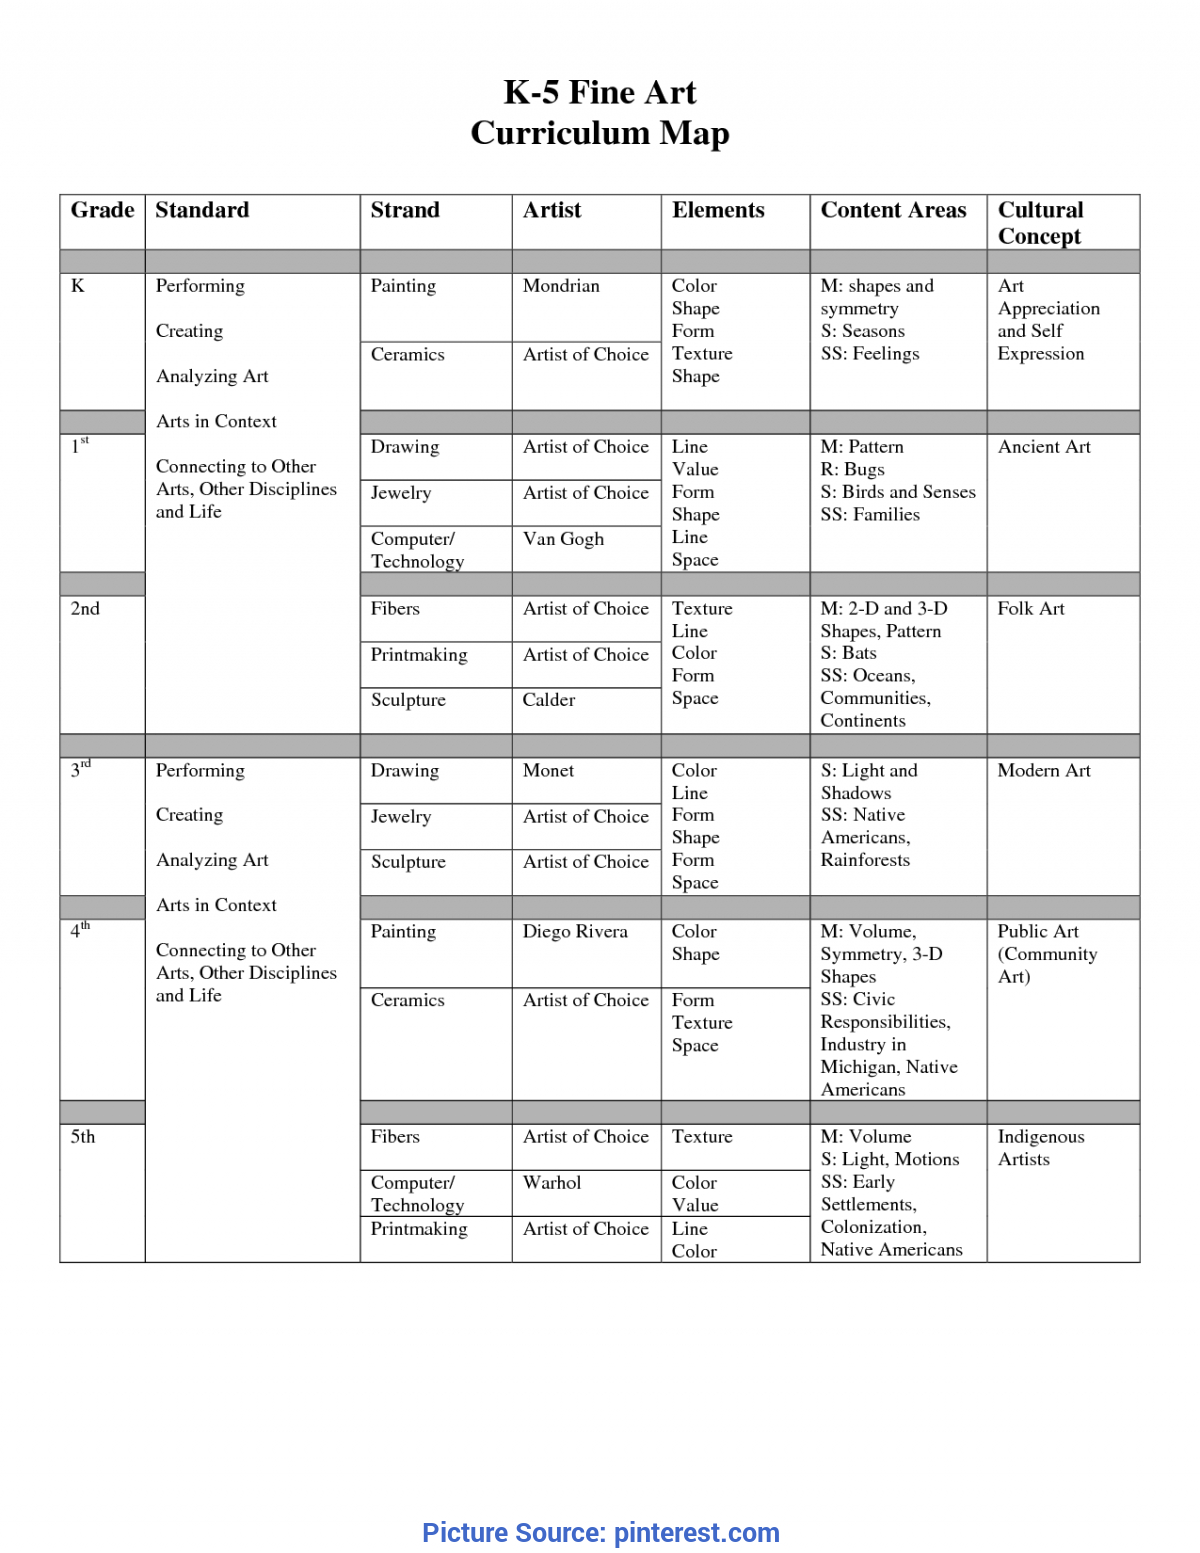 Special High School Art Curriculum Curriculum Mapping Visual Pertaining To Blank Curriculum Map Template